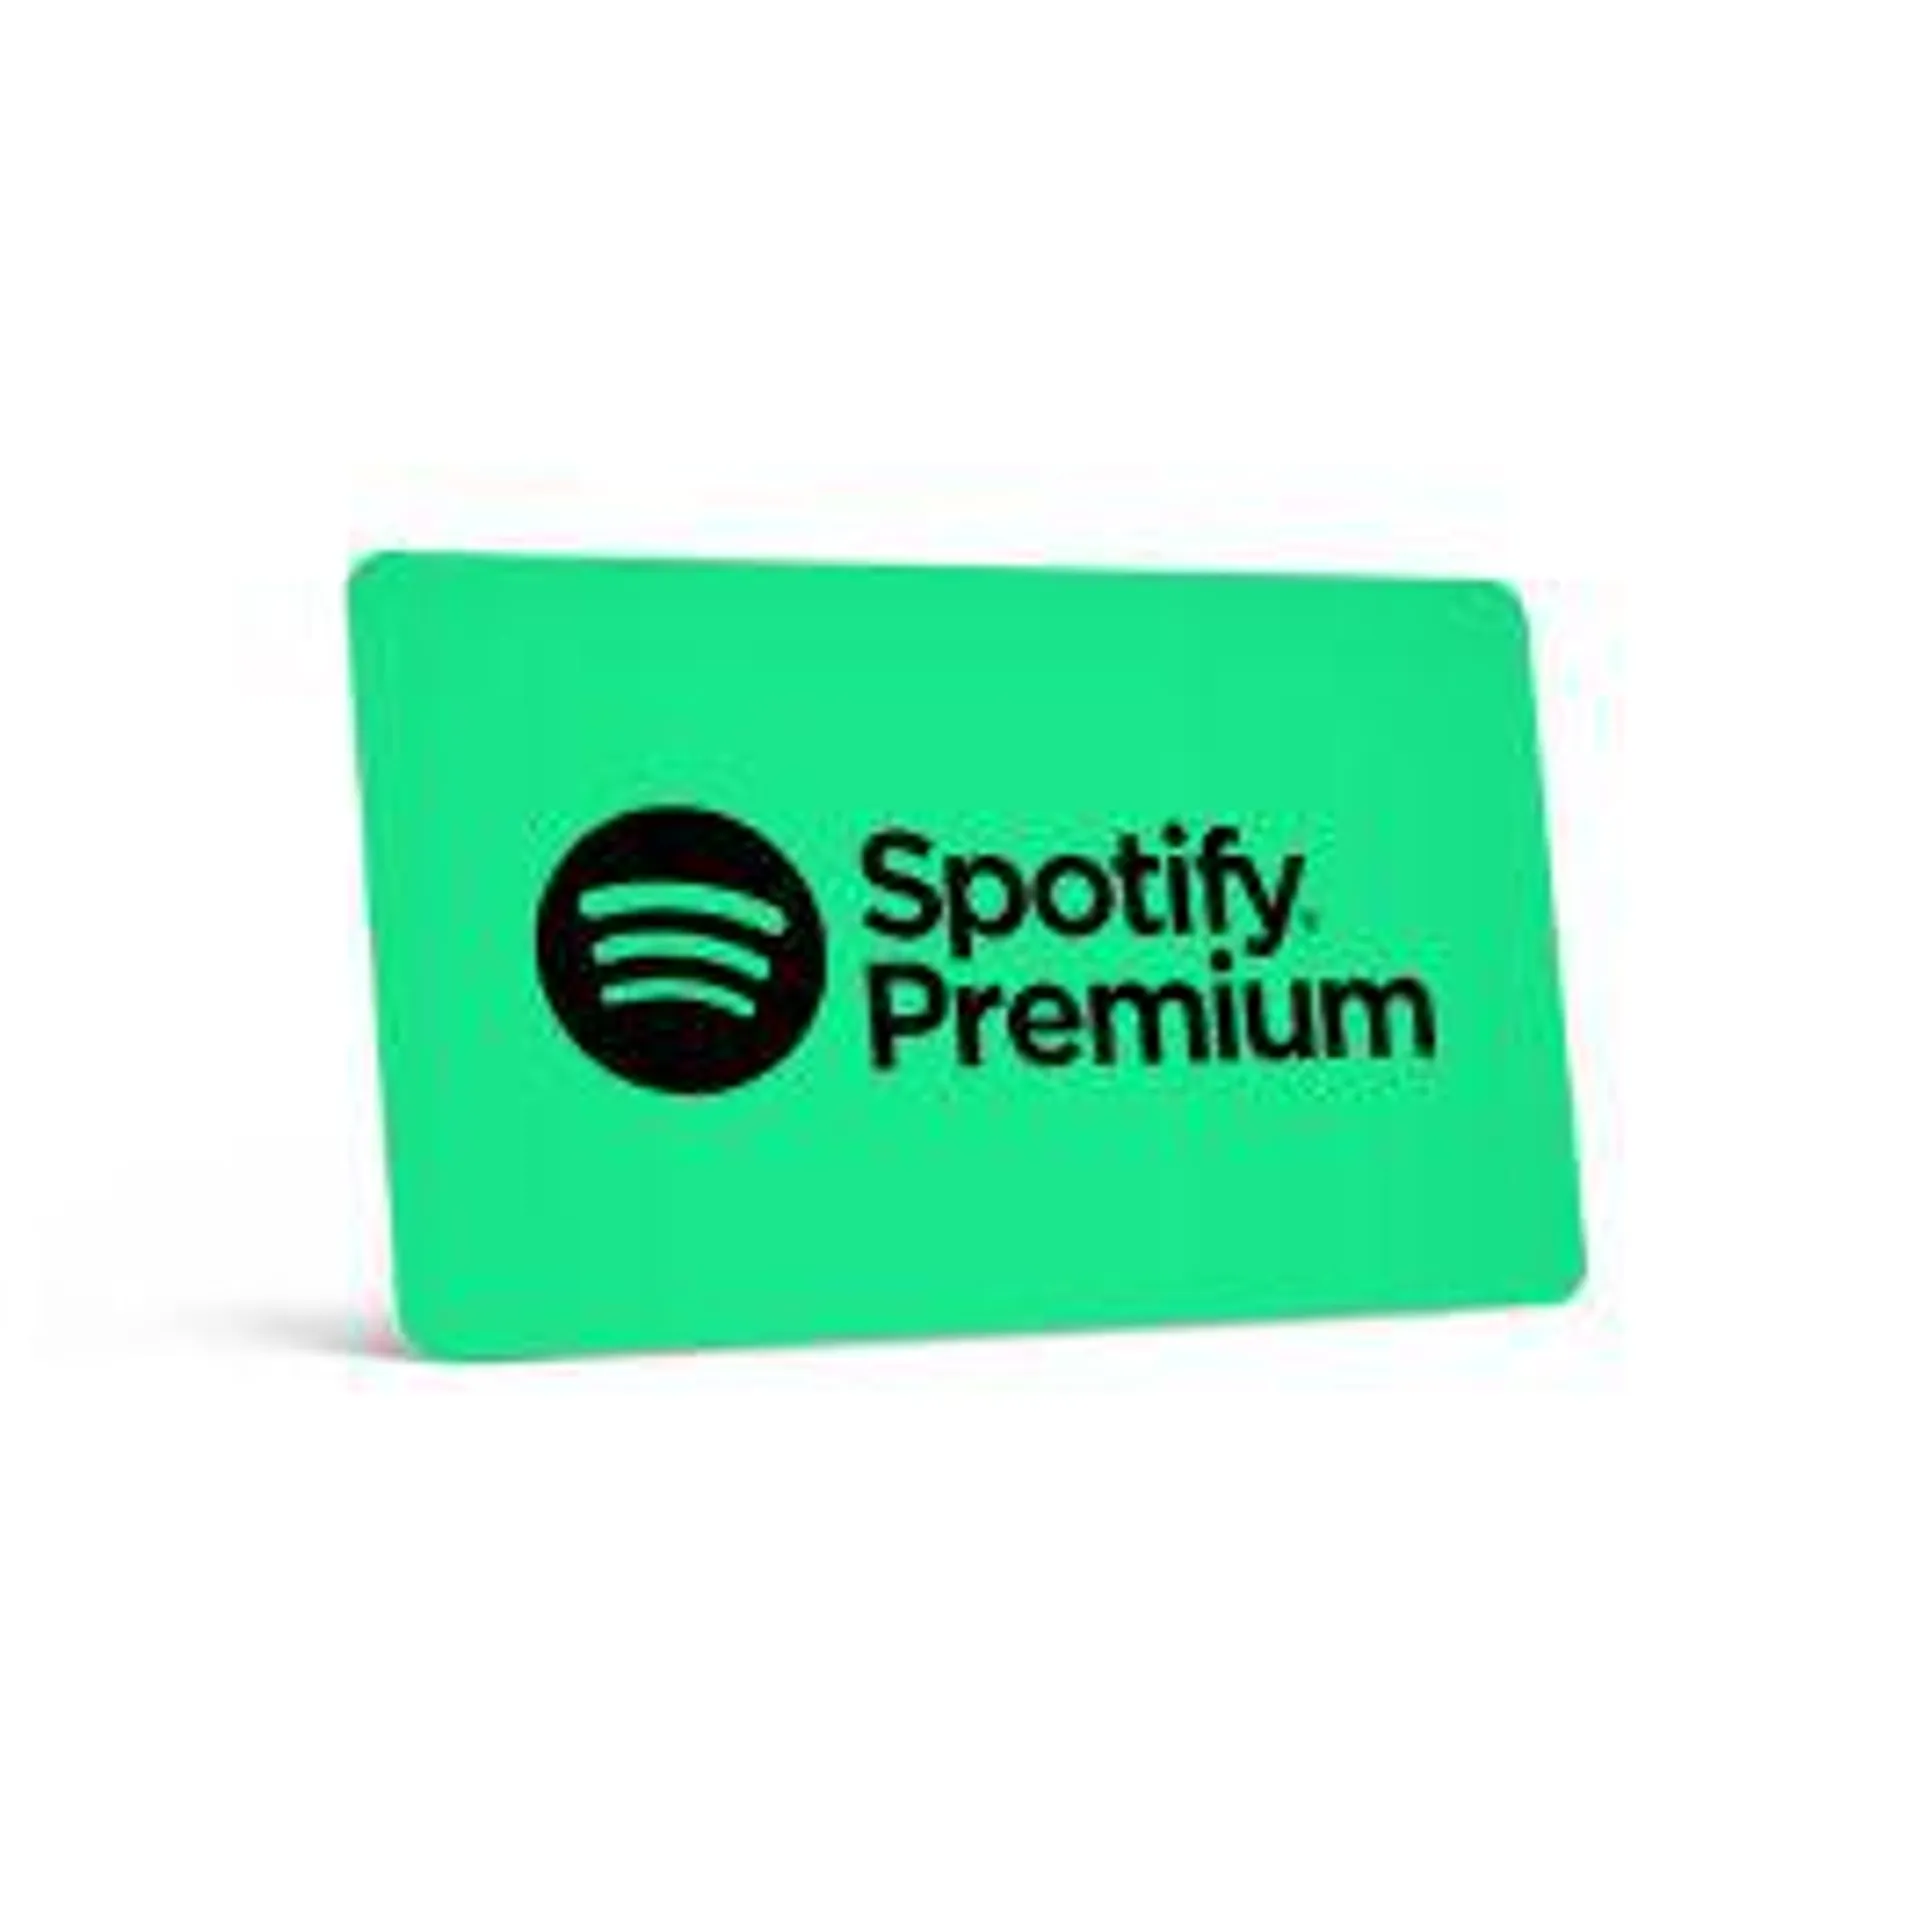 € 10,- Spotify Gift Card